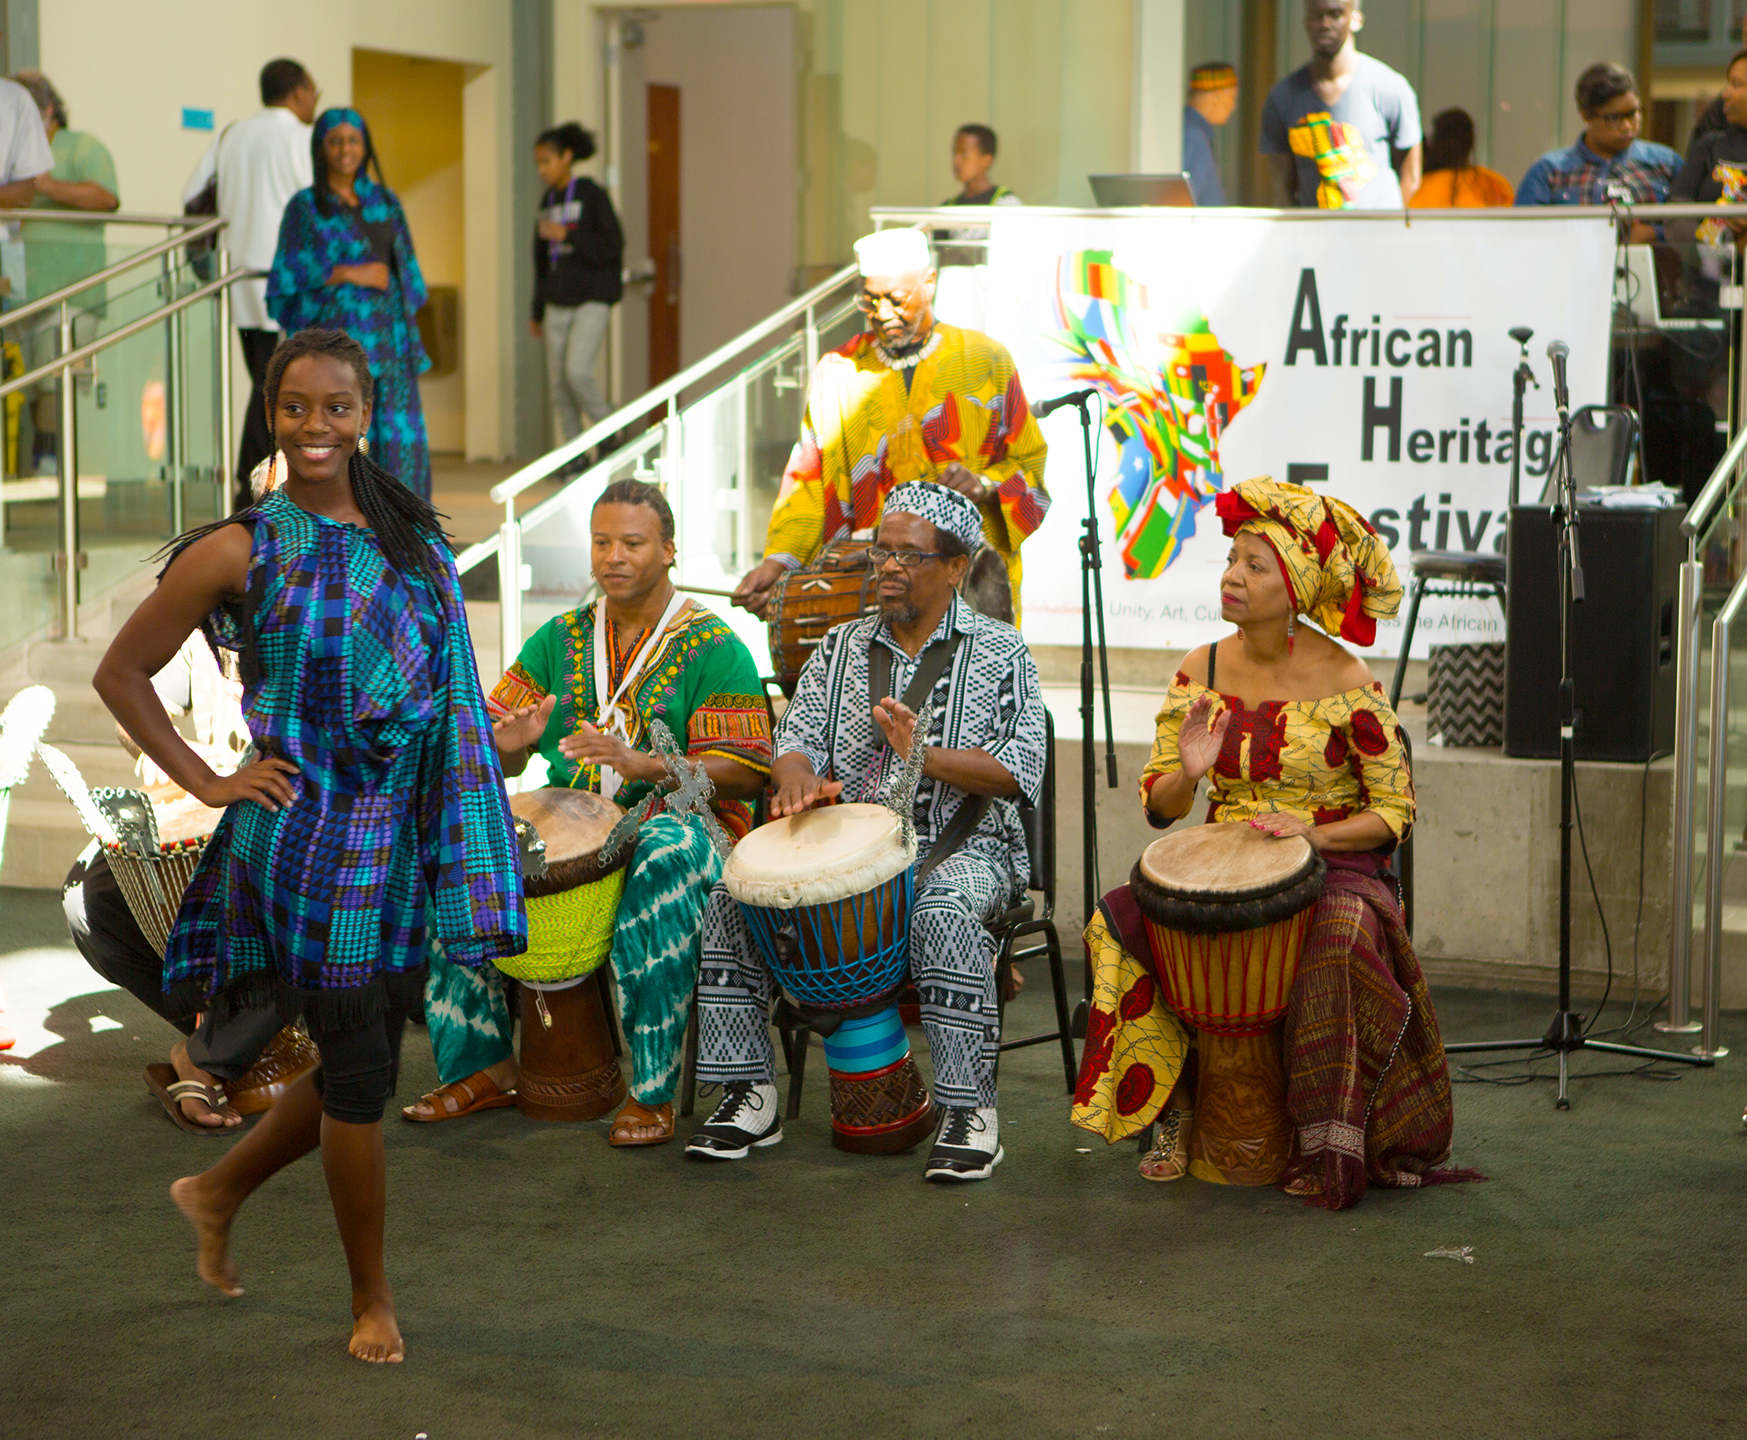 Dancer with live musicians at African Heritage festival